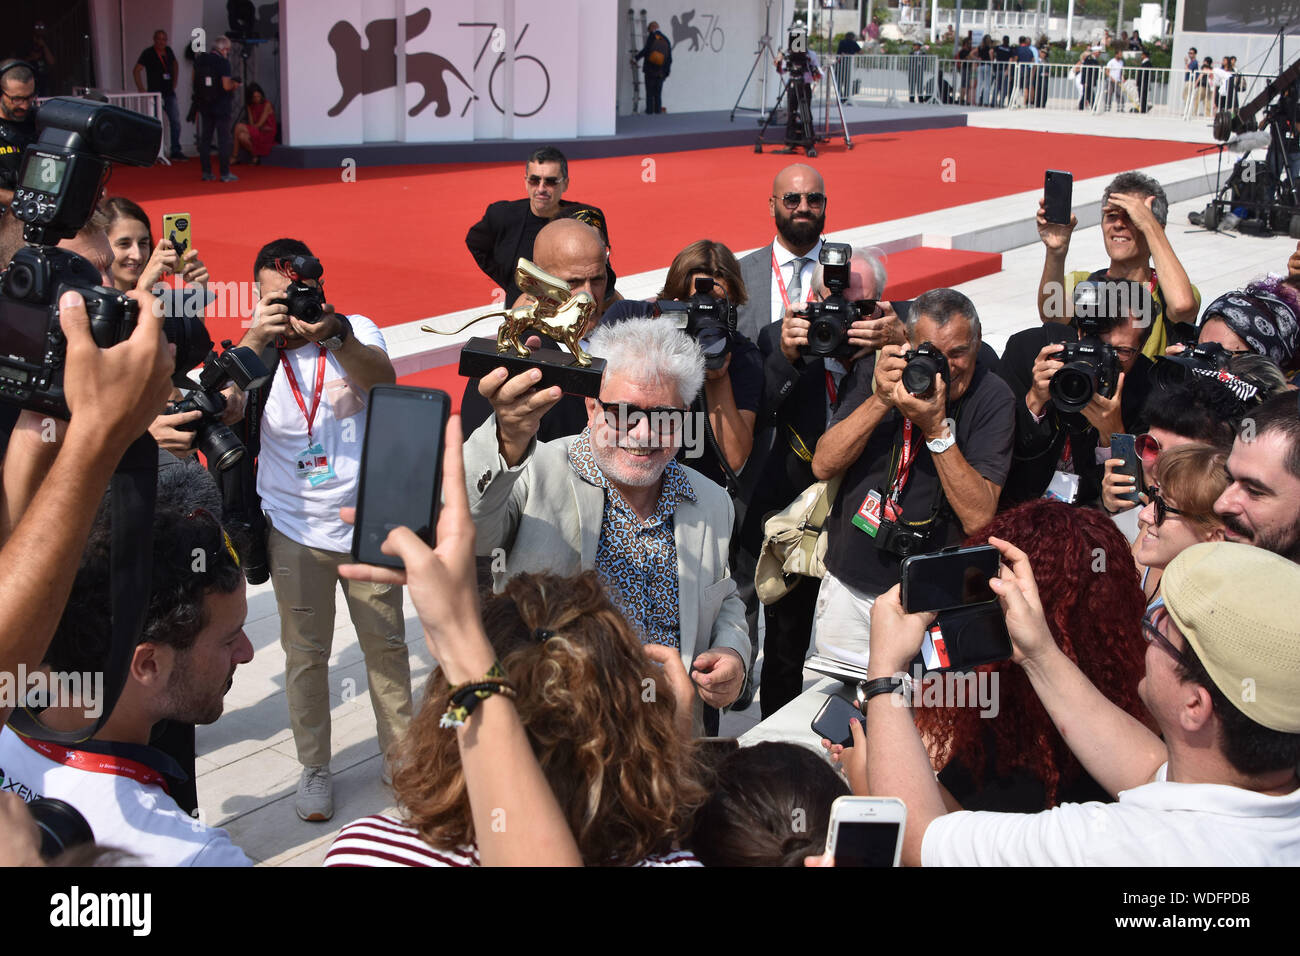 VENICE, Italy. 29th Aug, 2019. Pedro Almodovar shows the Golden Lion at Palazzo del Cinema after receiving it for lifetime achievements during the 76th Venice Film Festival on August 29, 2019 in Venice, Italy. Credit: Andrea Merola/Awakening/Alamy Live News Stock Photo